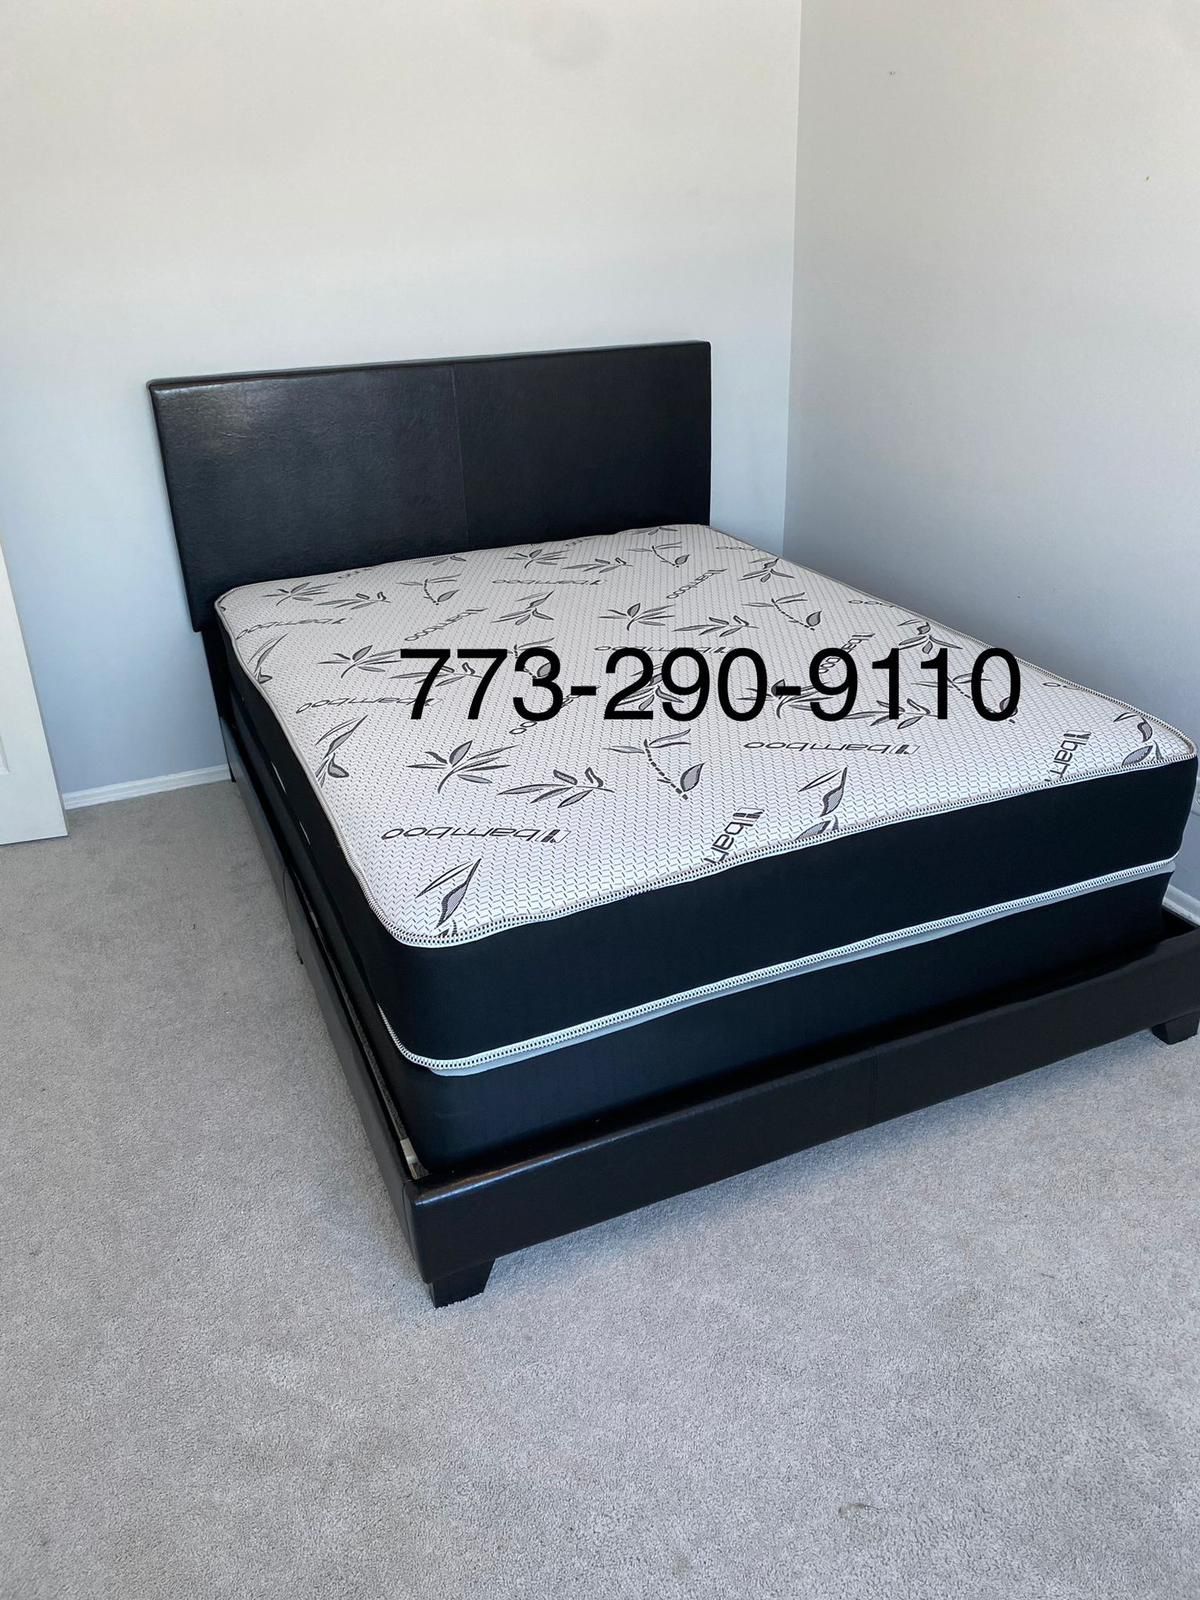 Queen size bed frame with headboard and mattress set complete bed delivery available 